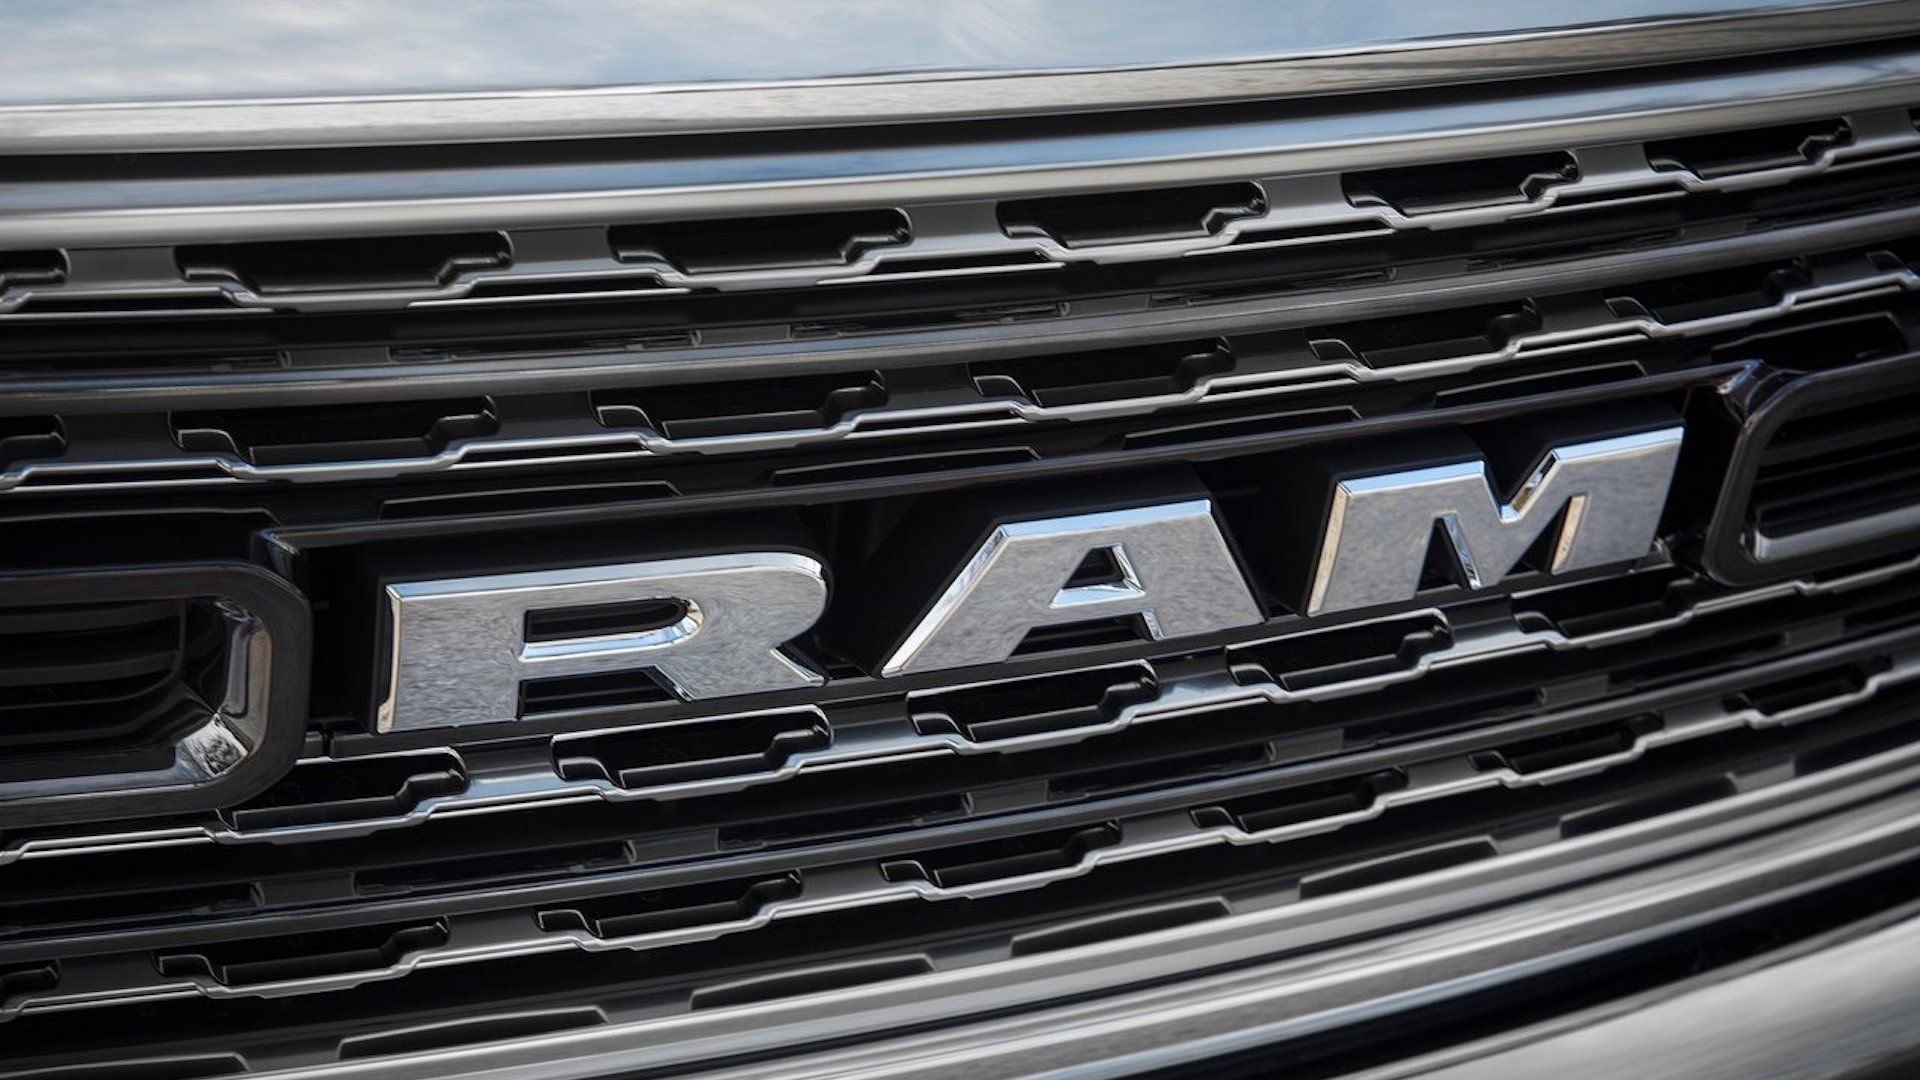 Ram Logo front grille